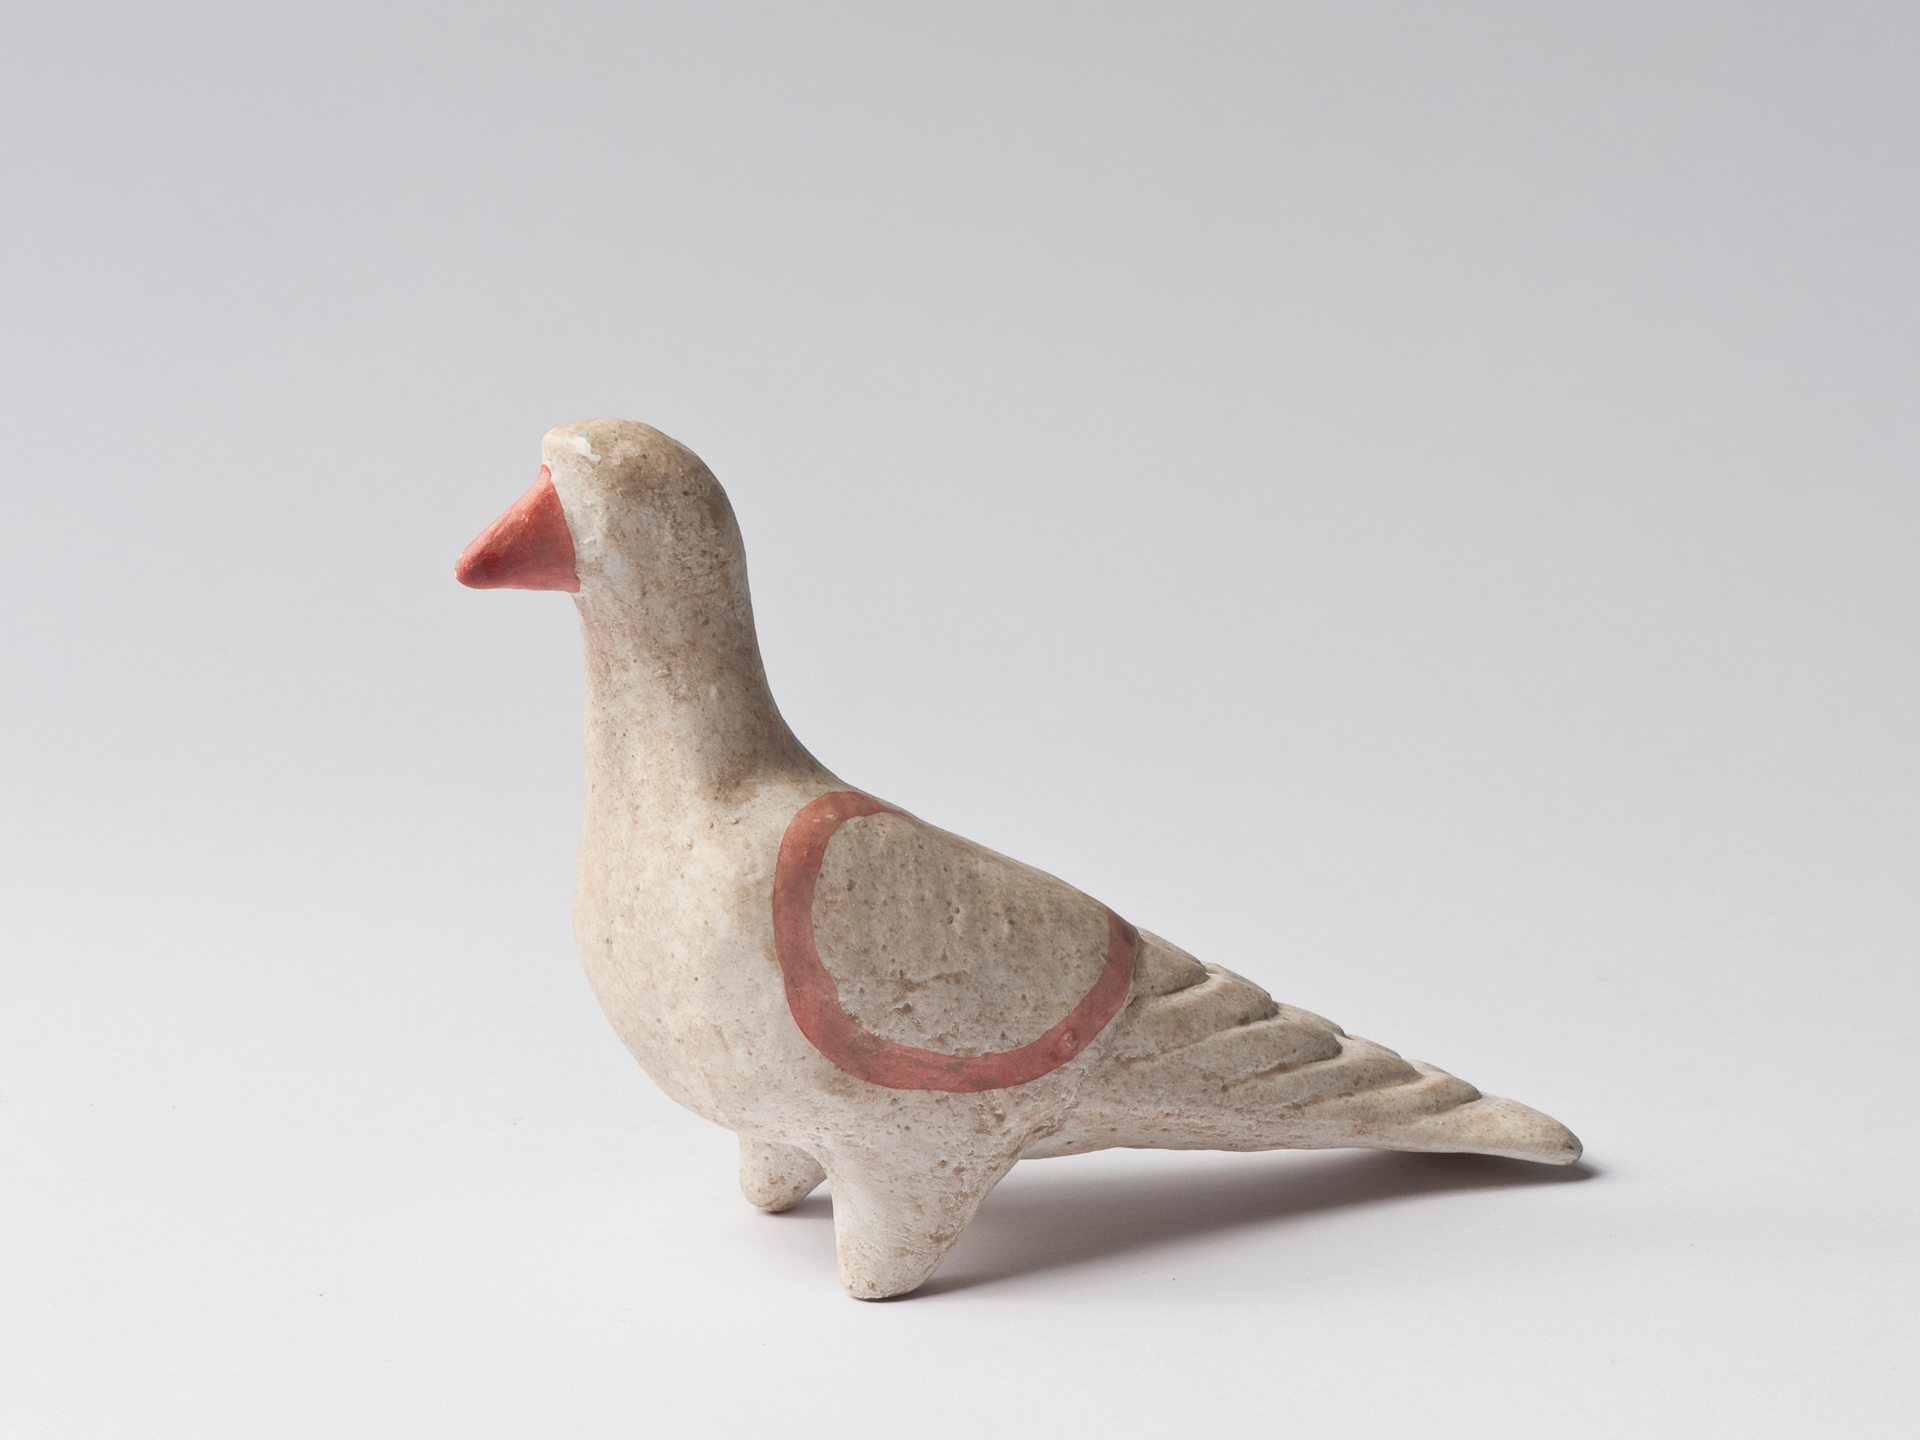 Figurine of a Dove made out of clay